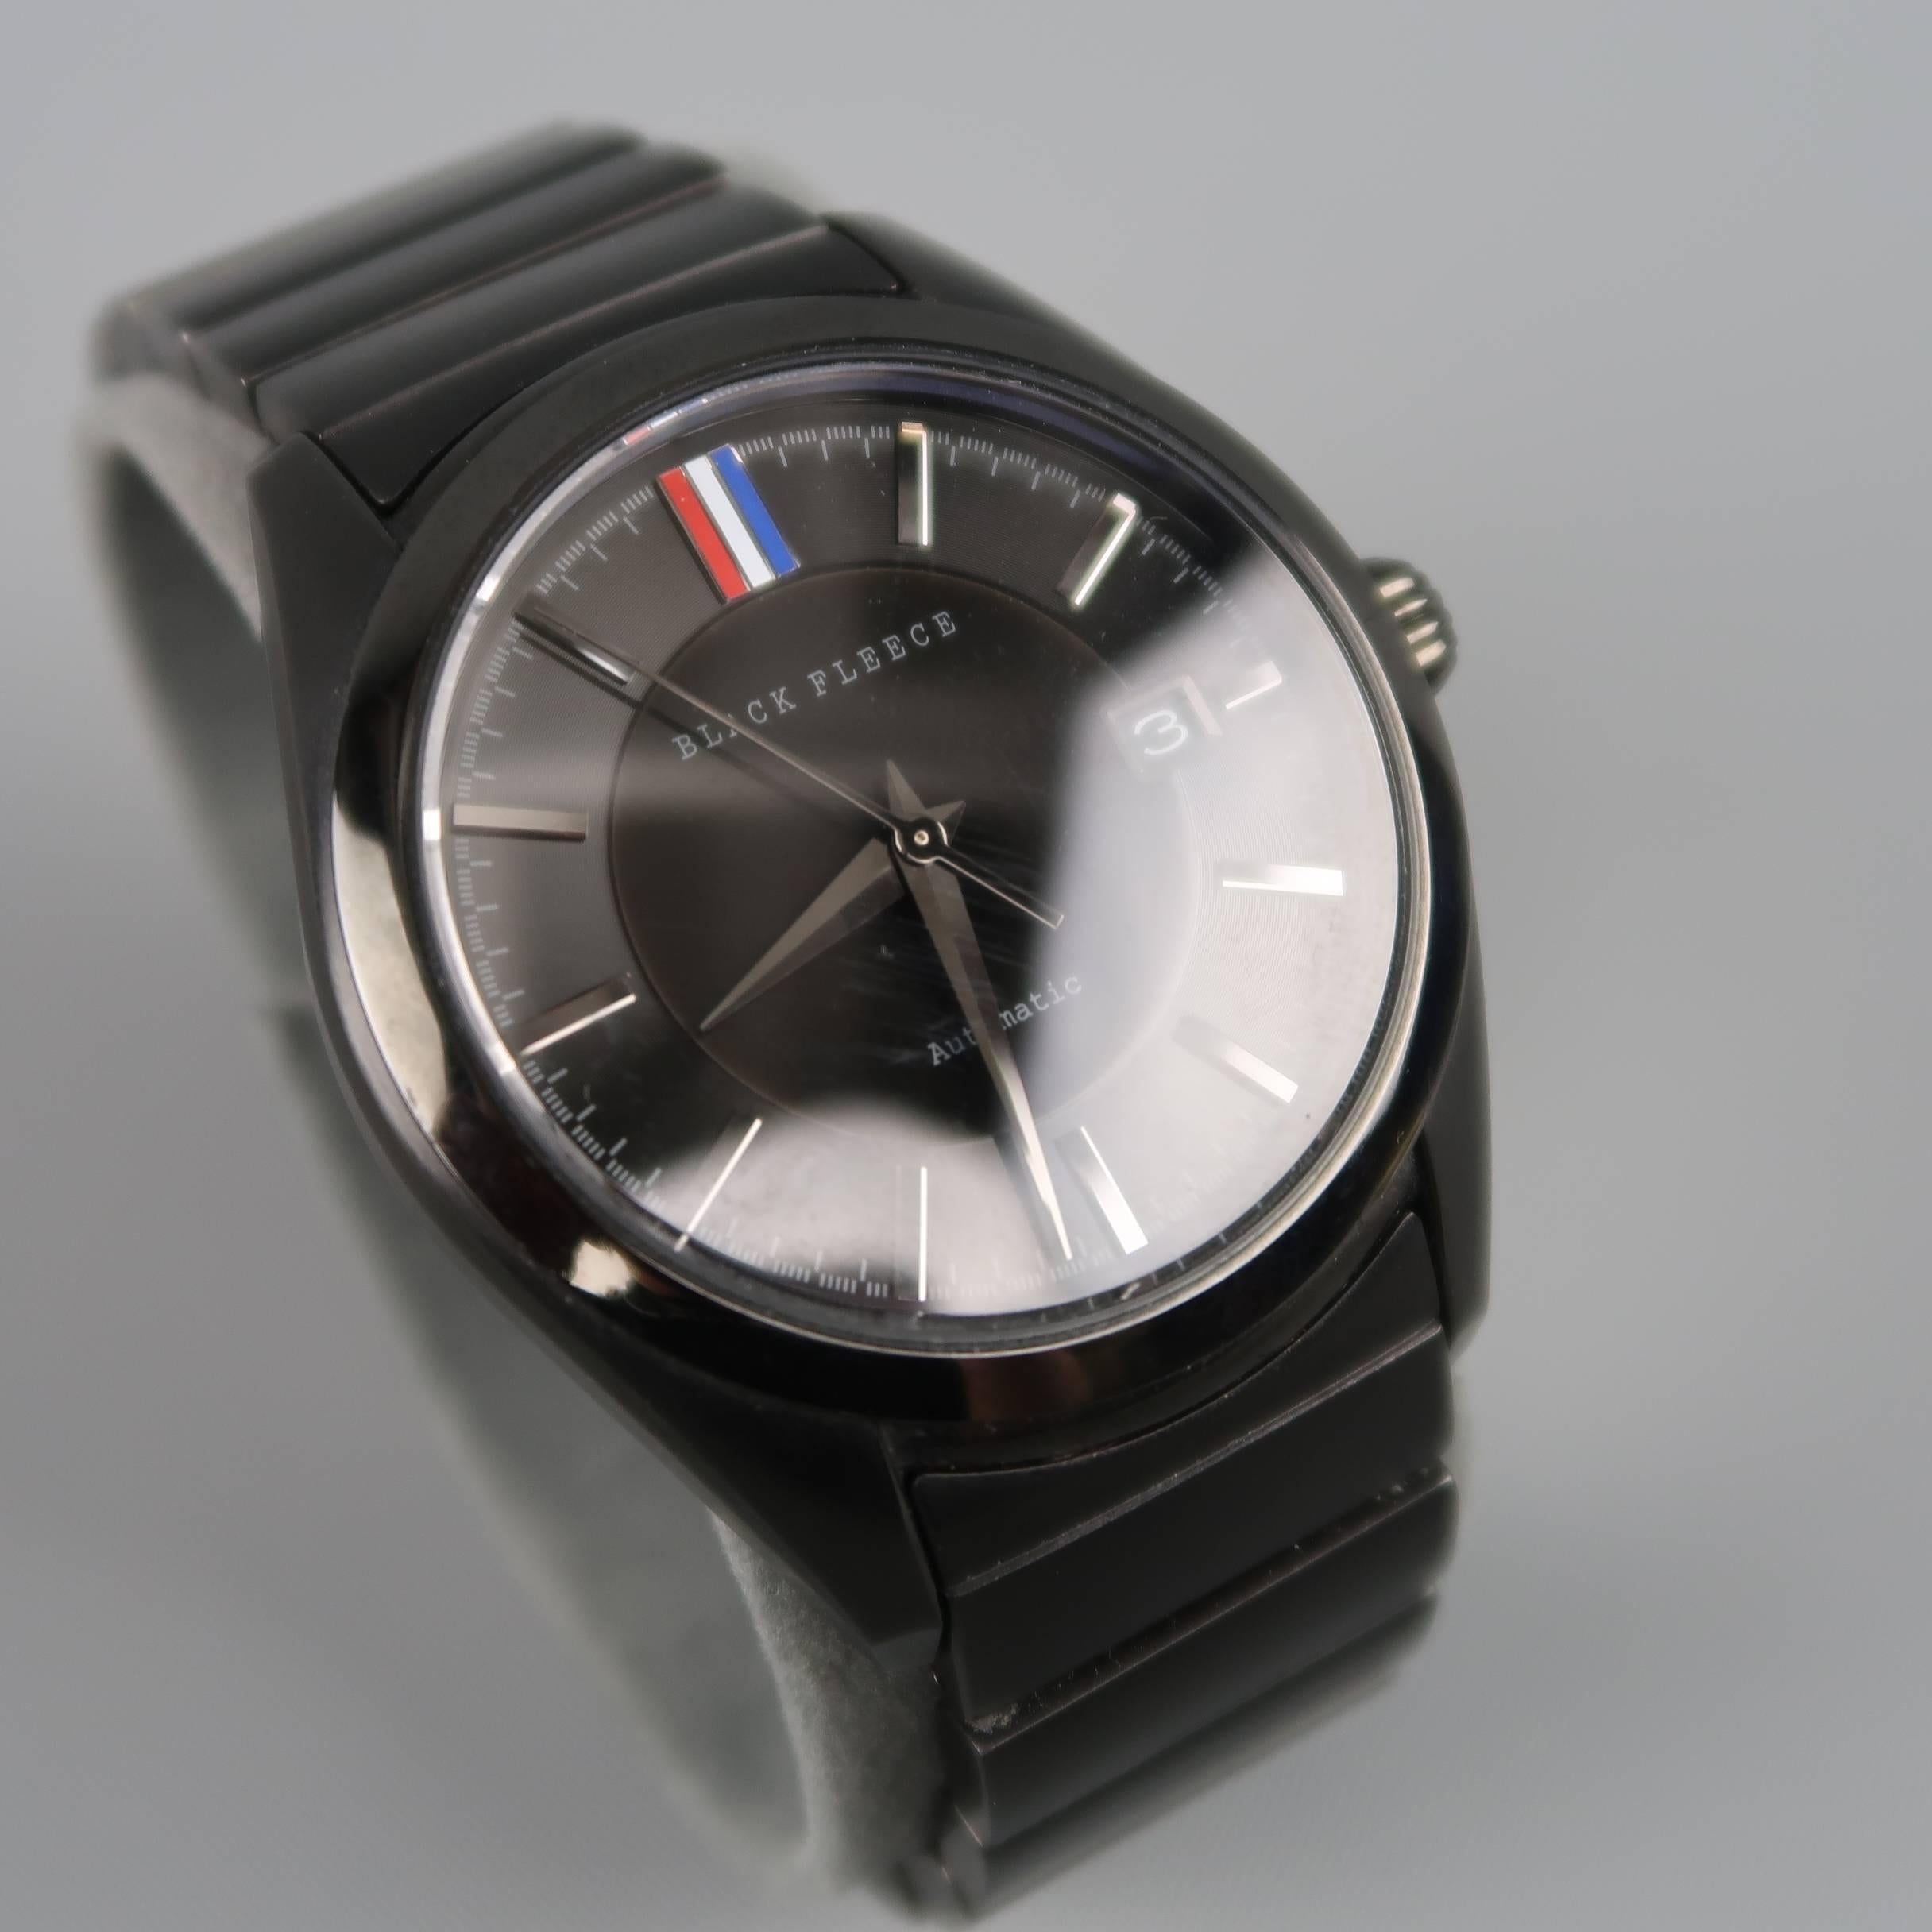 Special edition Brooks Brothers Black Fleece watch comes in black stainless steel and features a round clock face with automatic wind and signature red white and blue stripe. Only 250 produced. Extra piece included. With box.  Made in Japan.
 
Good